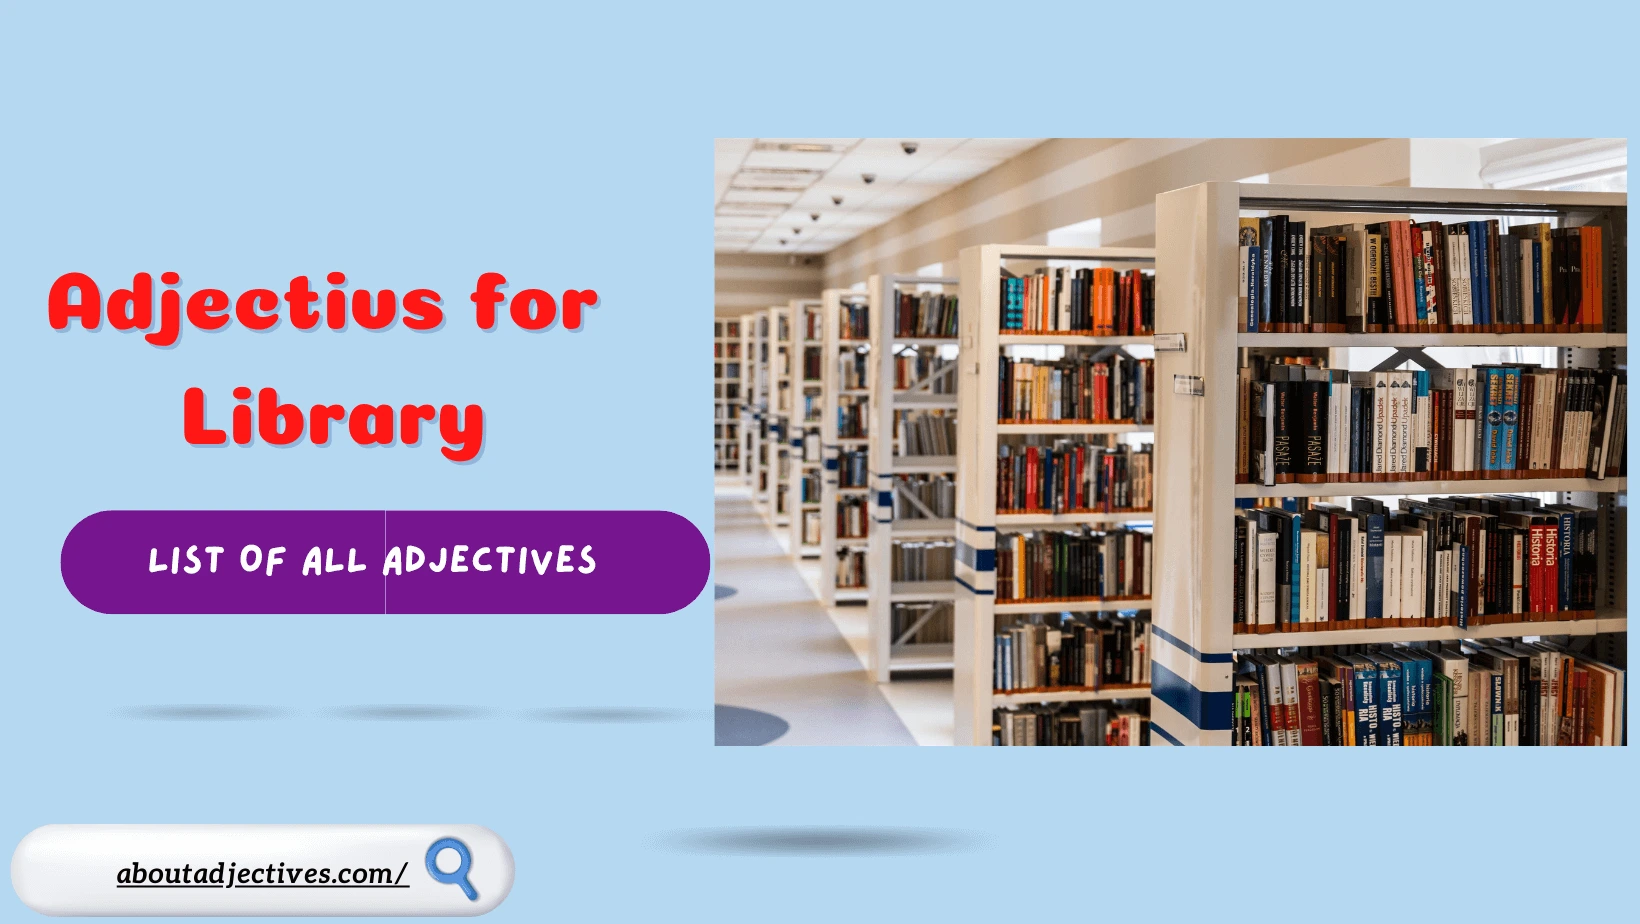 Adjectives for Library